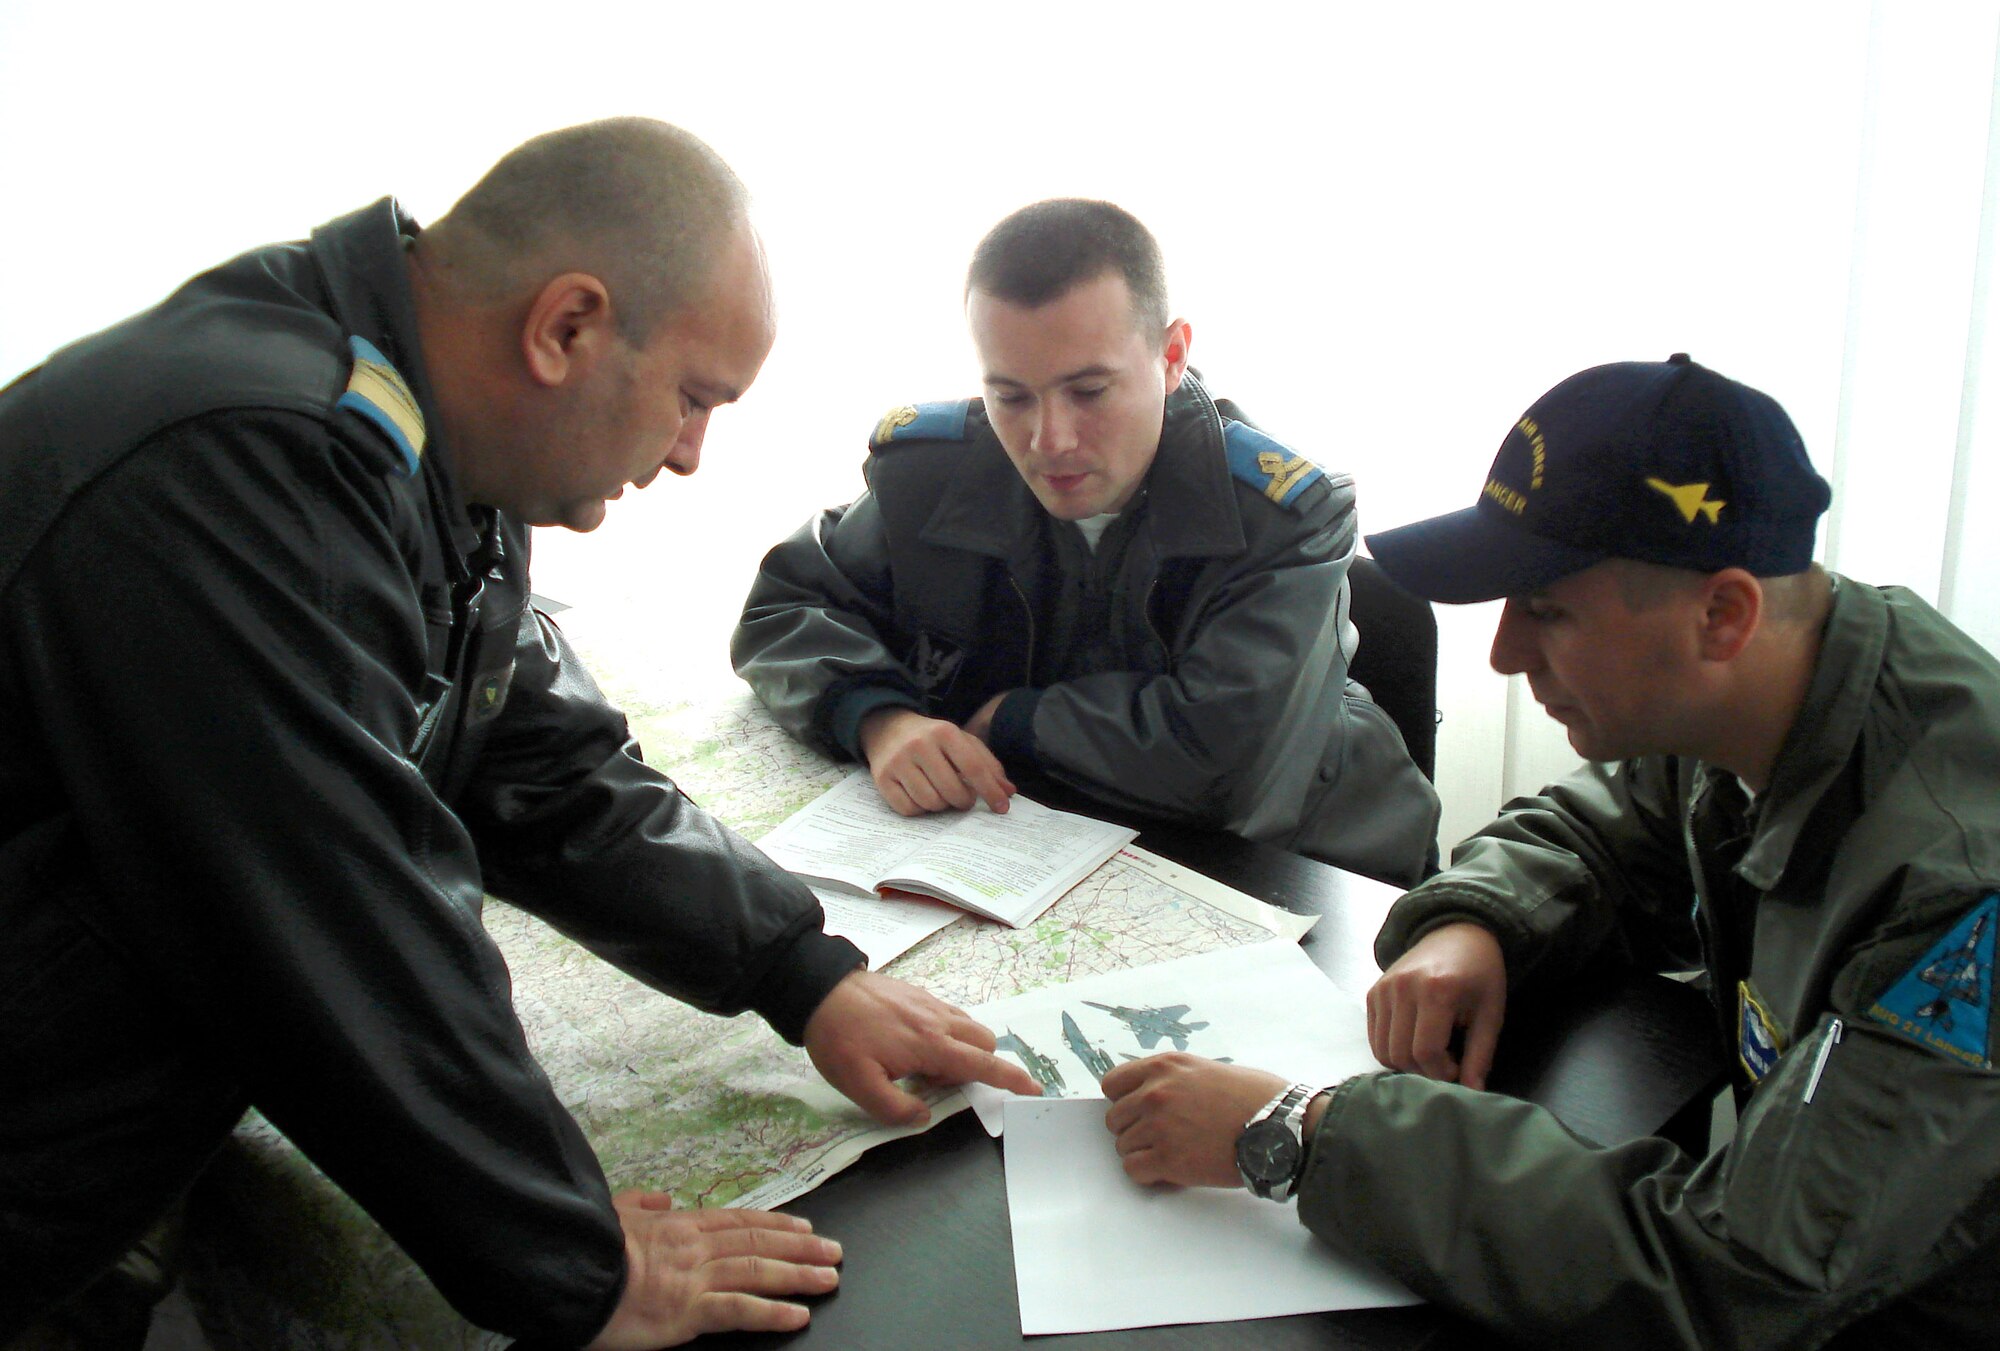 Captain Commander Dobre Constantin and First Lieutenants Mihaita Marin and Radu Paraschiv discuss F-15C and MIG 21 flight paths during Sniper Lance 2007, an exercise with more than 200 Airmen from United States Air Forces in Europe. The exercise, which includes Romanian MIG-21s from the nearby 86th Air Base, F-15Cs from Royal Air Force Lakenheath and KC-135s from RAF Mildenhall ends May 4. (U.S. Air Force photo/Capt. Jamie Humphries)